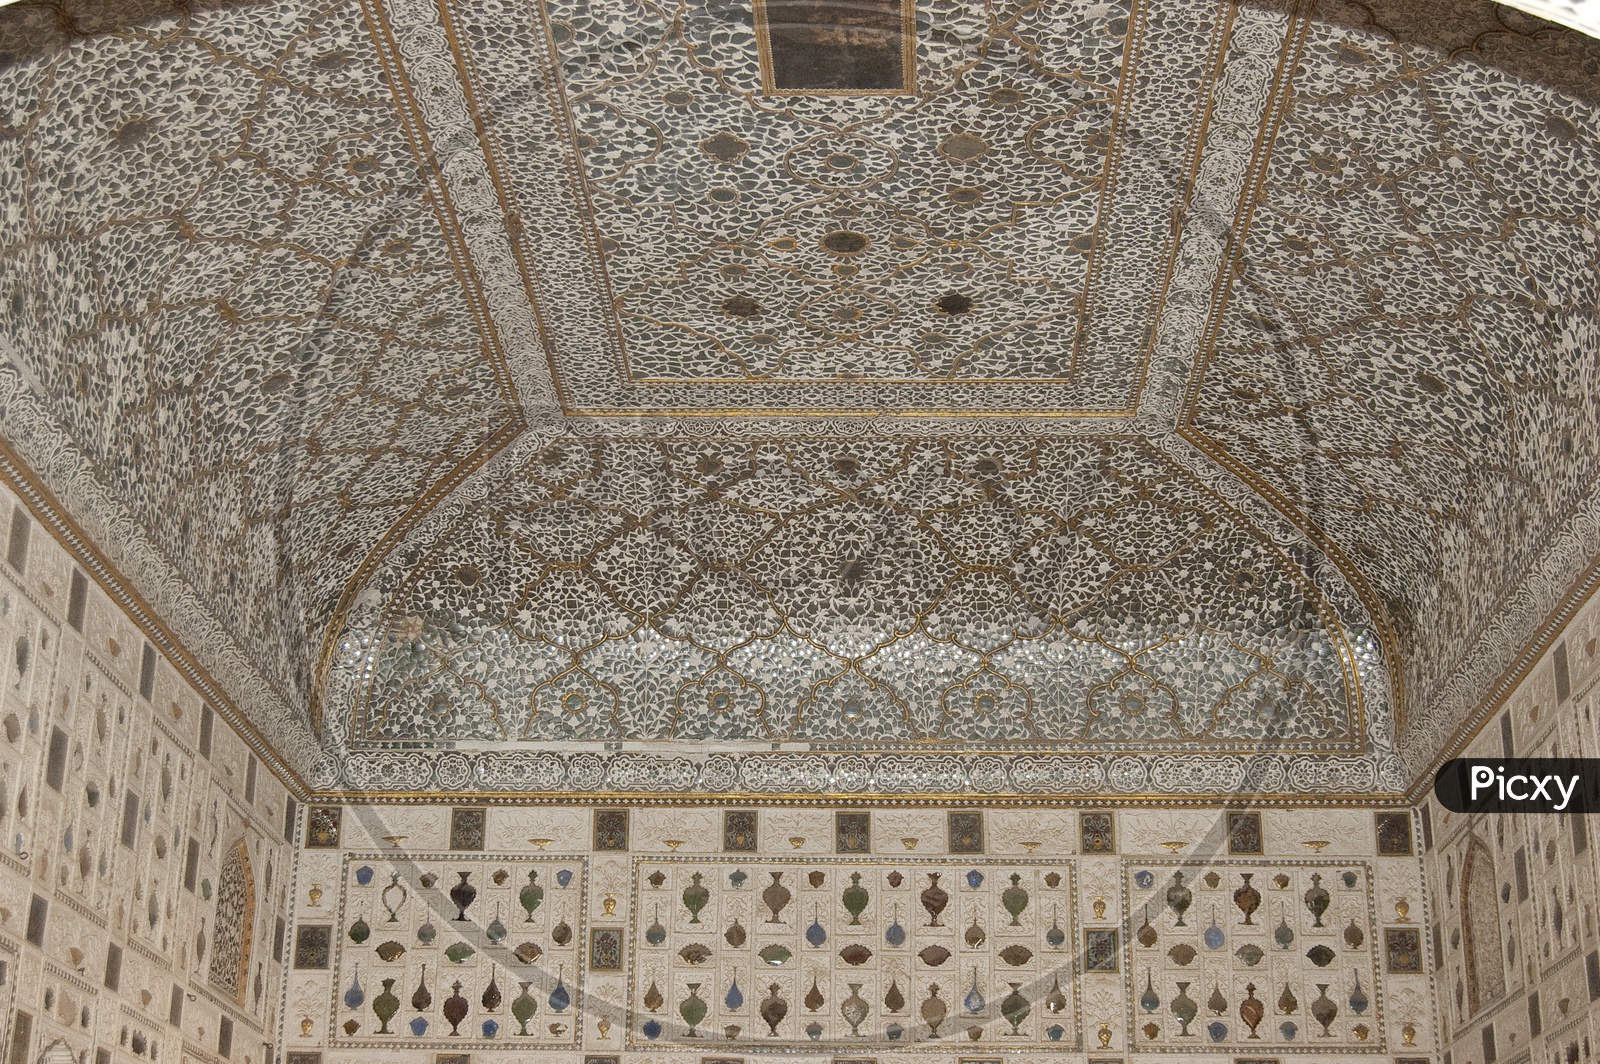 Mirror Palace in Amer or Amber Fort, Jaipur